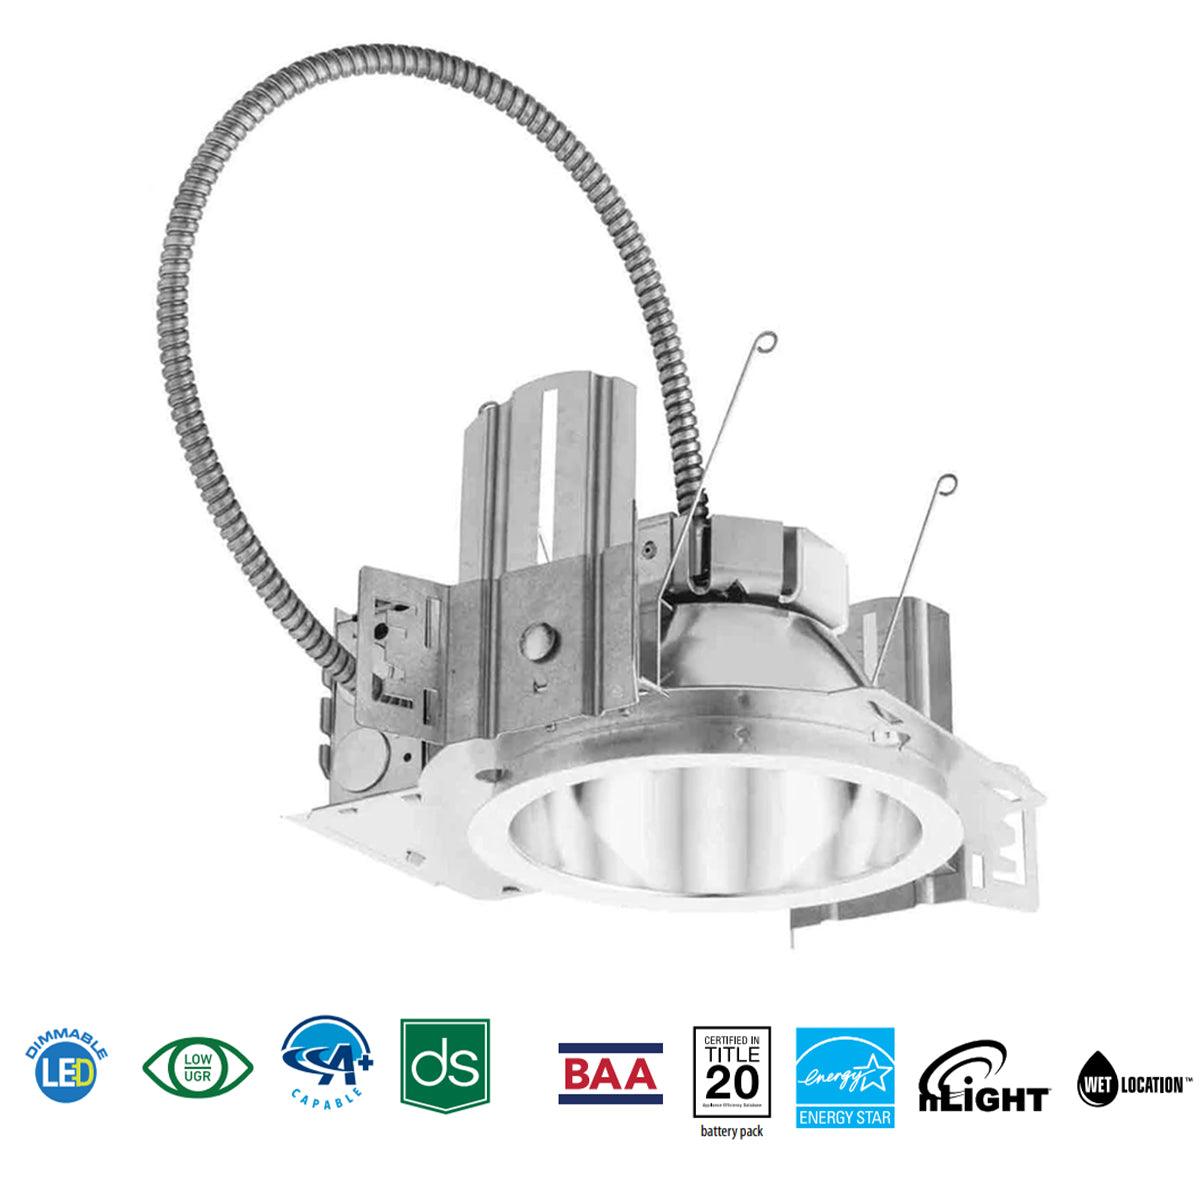 Lithonia LDN6 Commercial LED Recessed Downlight, 1500 lumens, 3500K (Reflector Sold Separately) - Bees Lighting